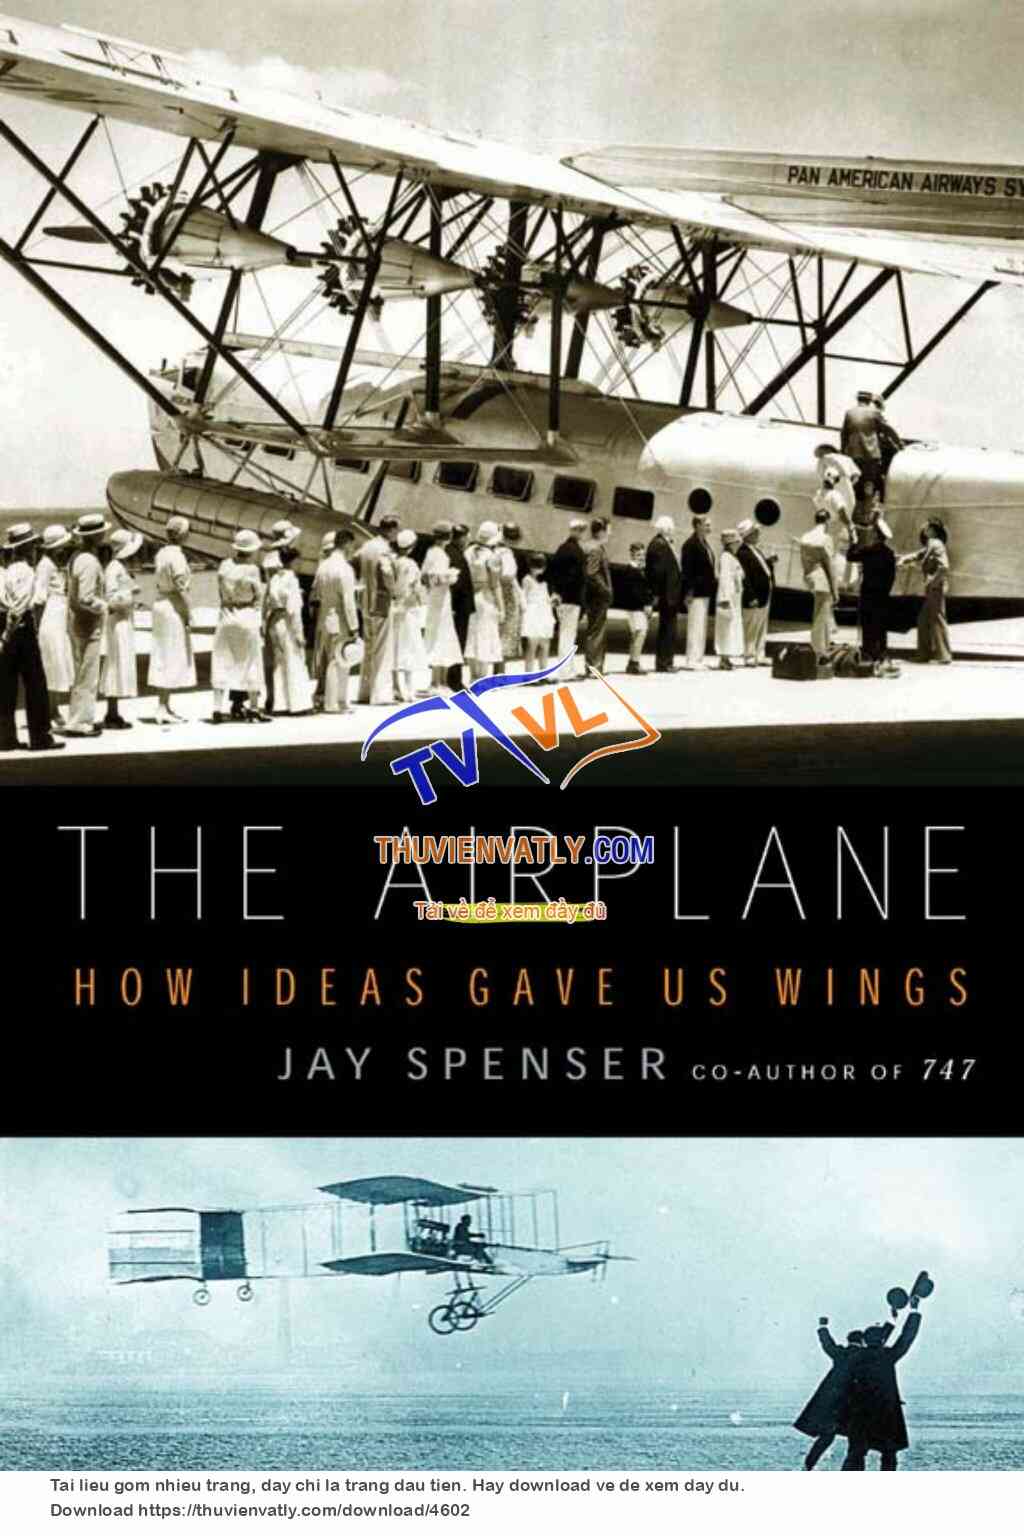 The Airplane - How Ideas Gave Us Wings